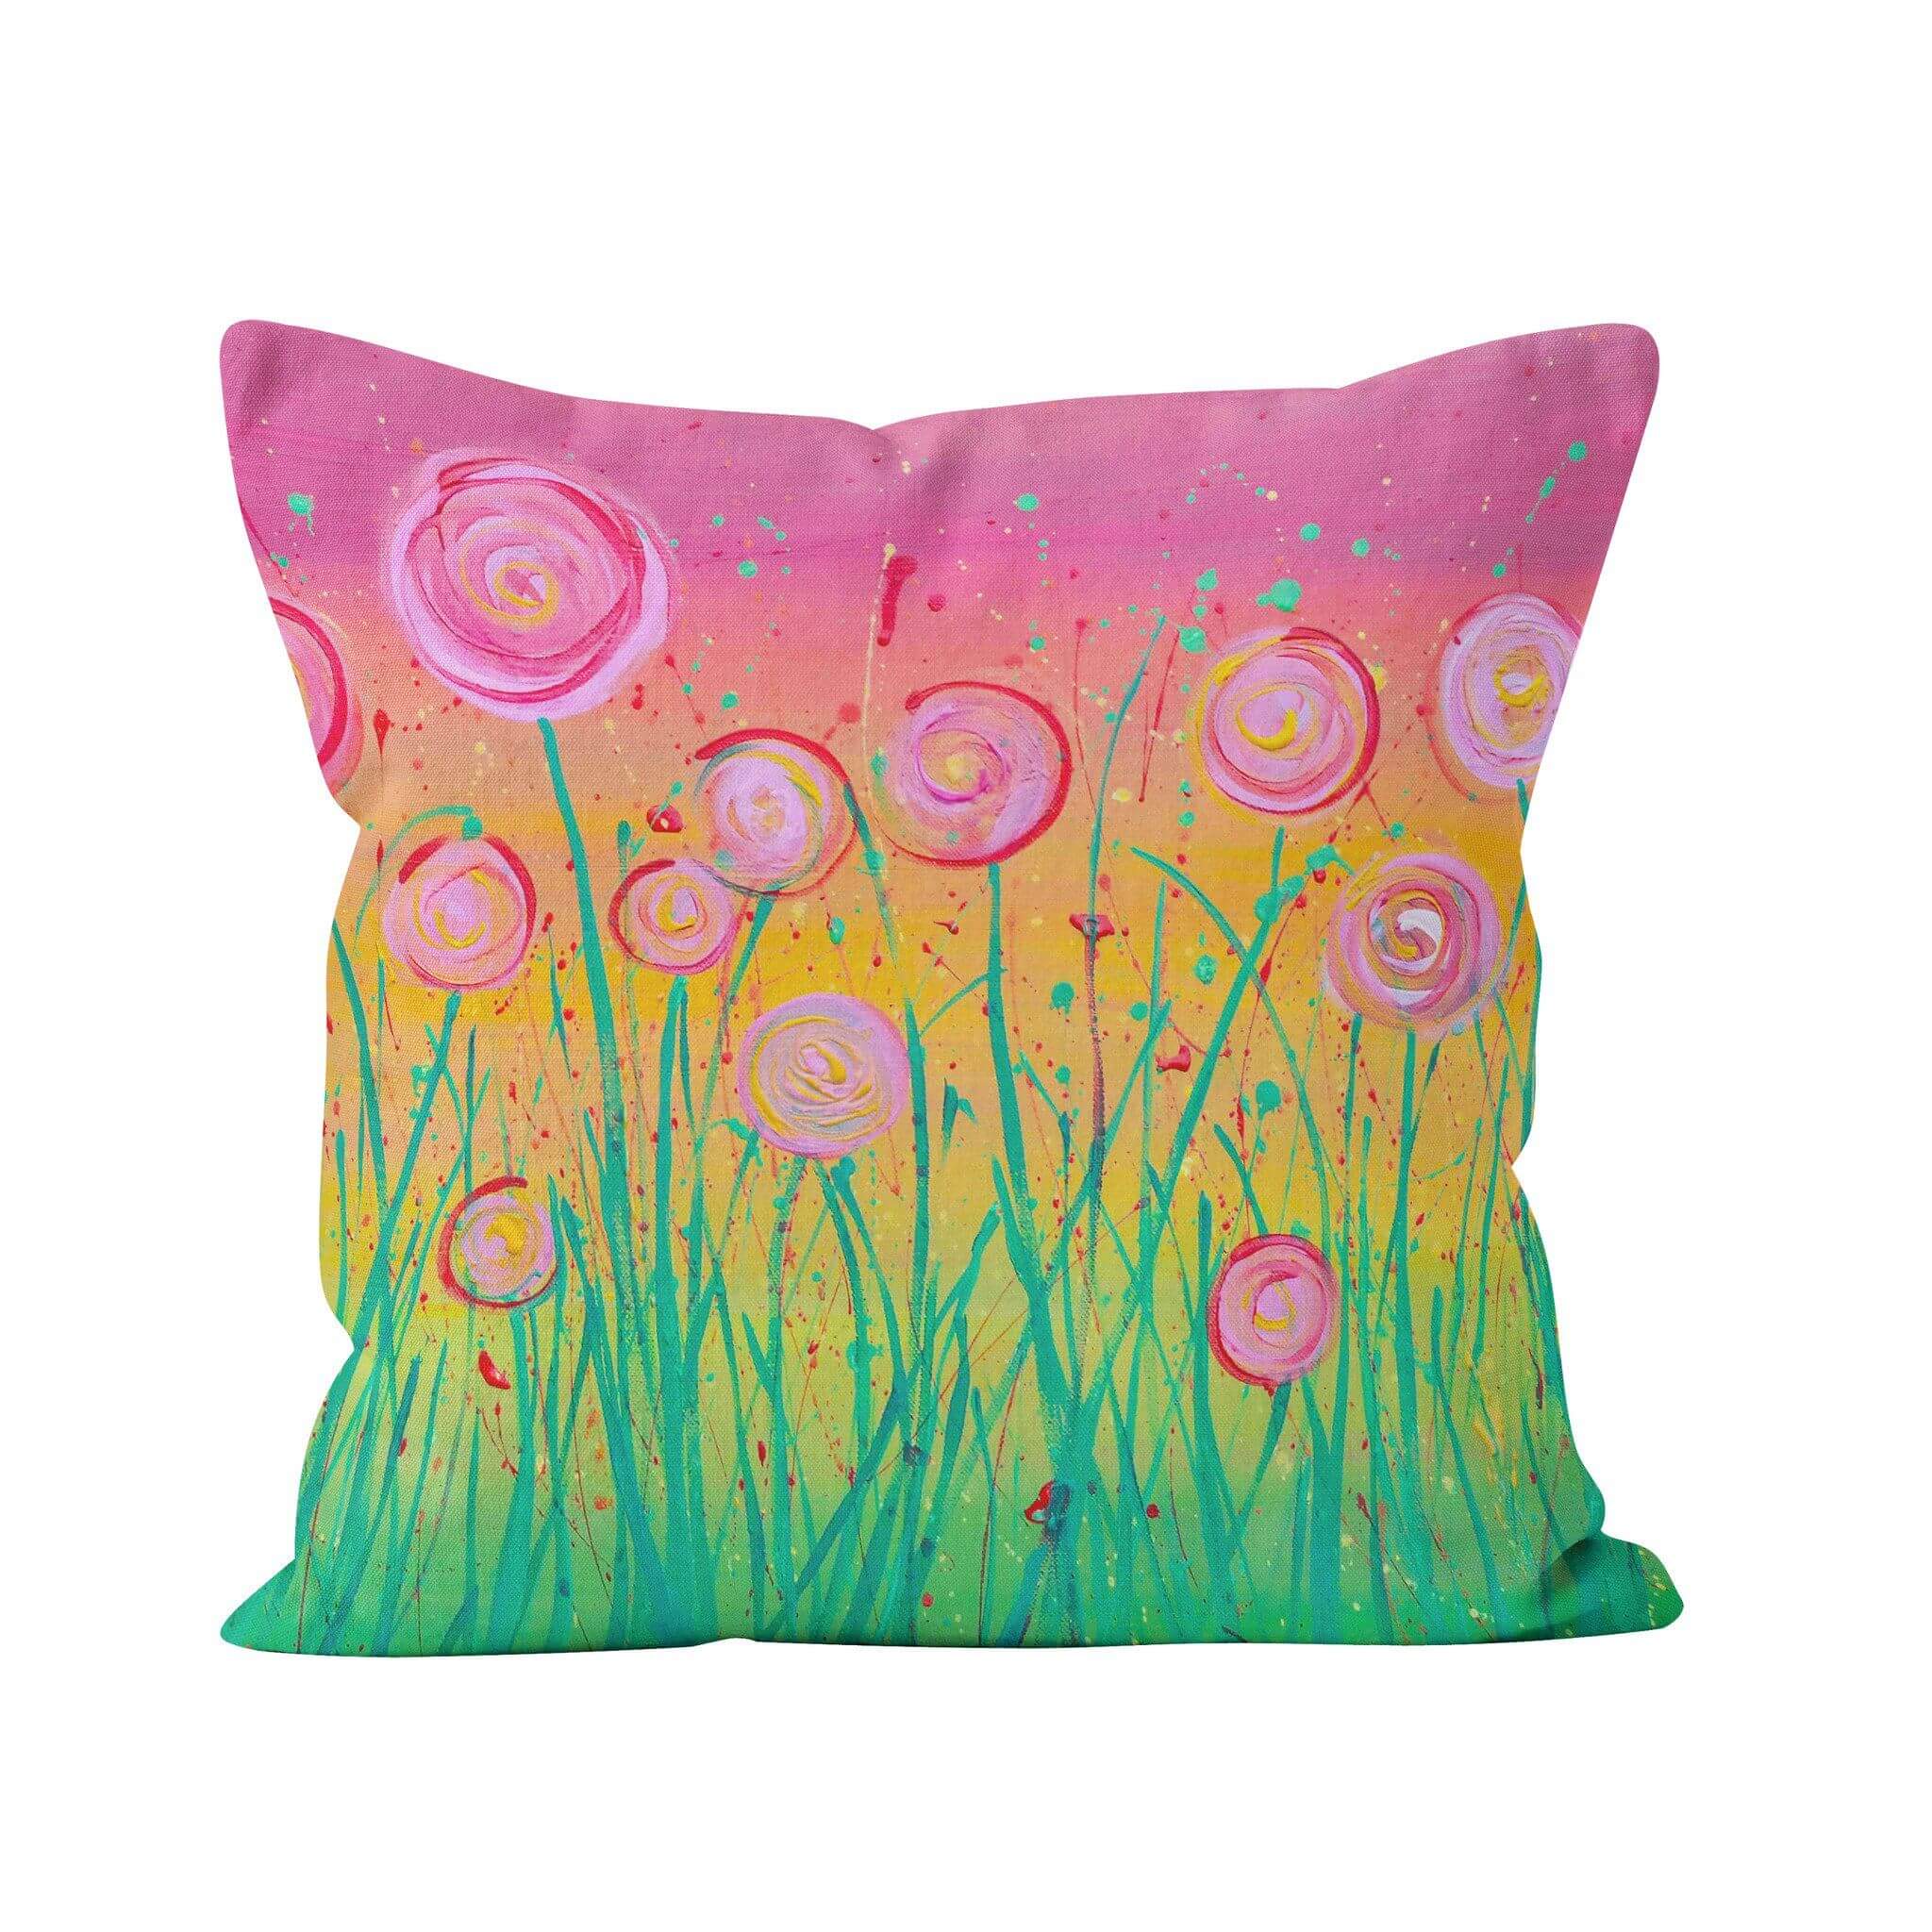 January Giveaway - Win a Cushion Worth £25 - Louise Mead